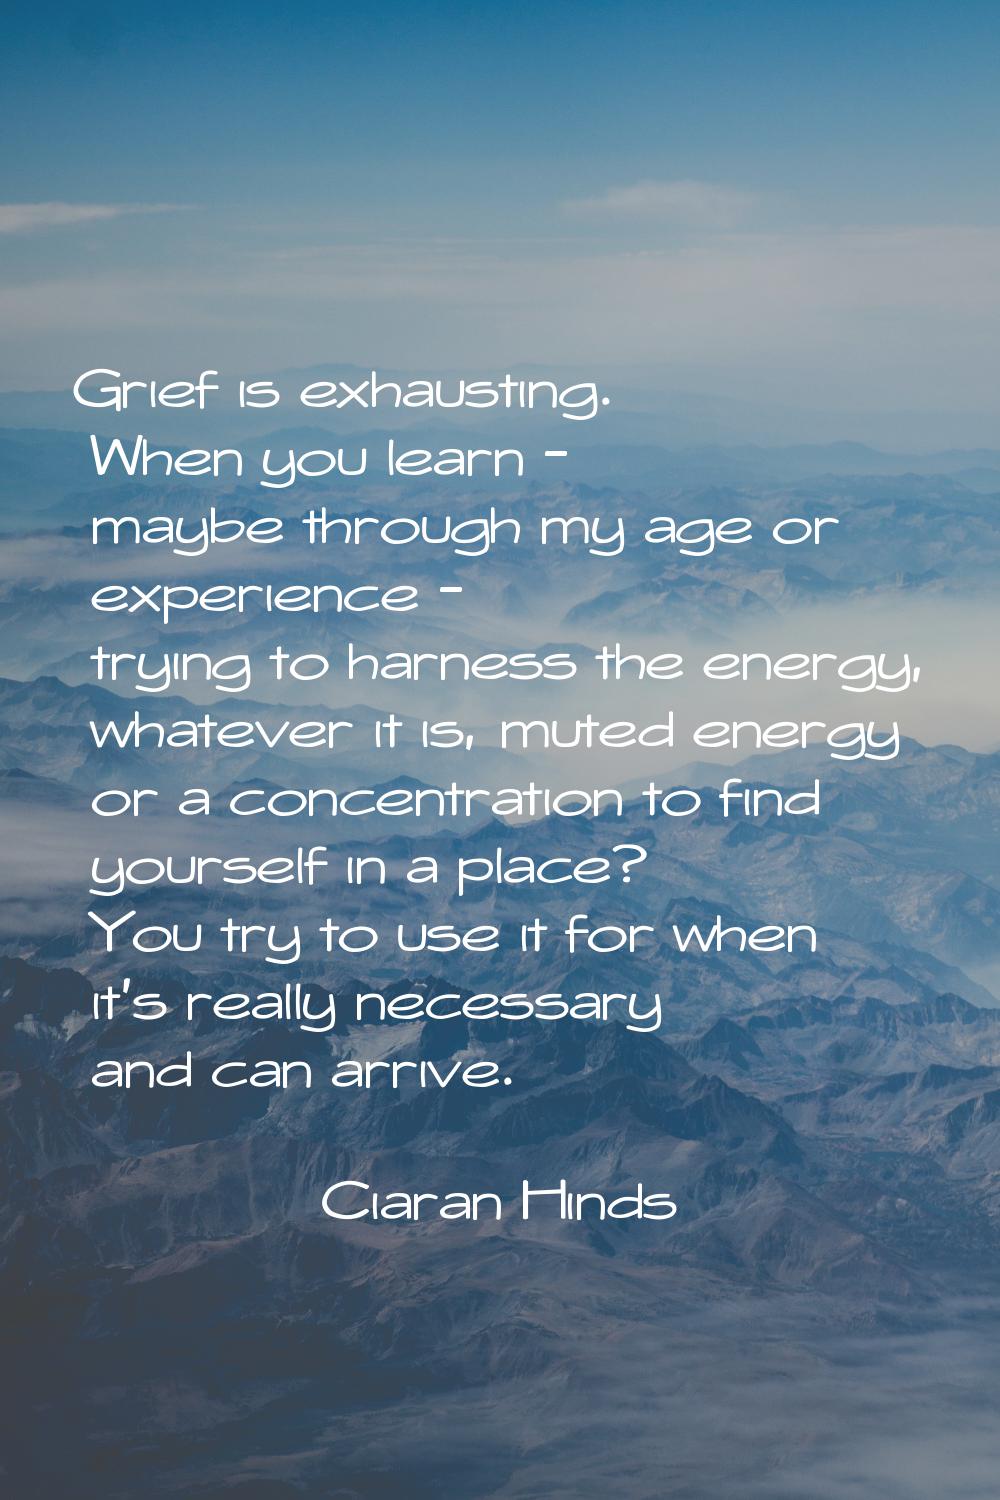 Grief is exhausting. When you learn - maybe through my age or experience - trying to harness the en